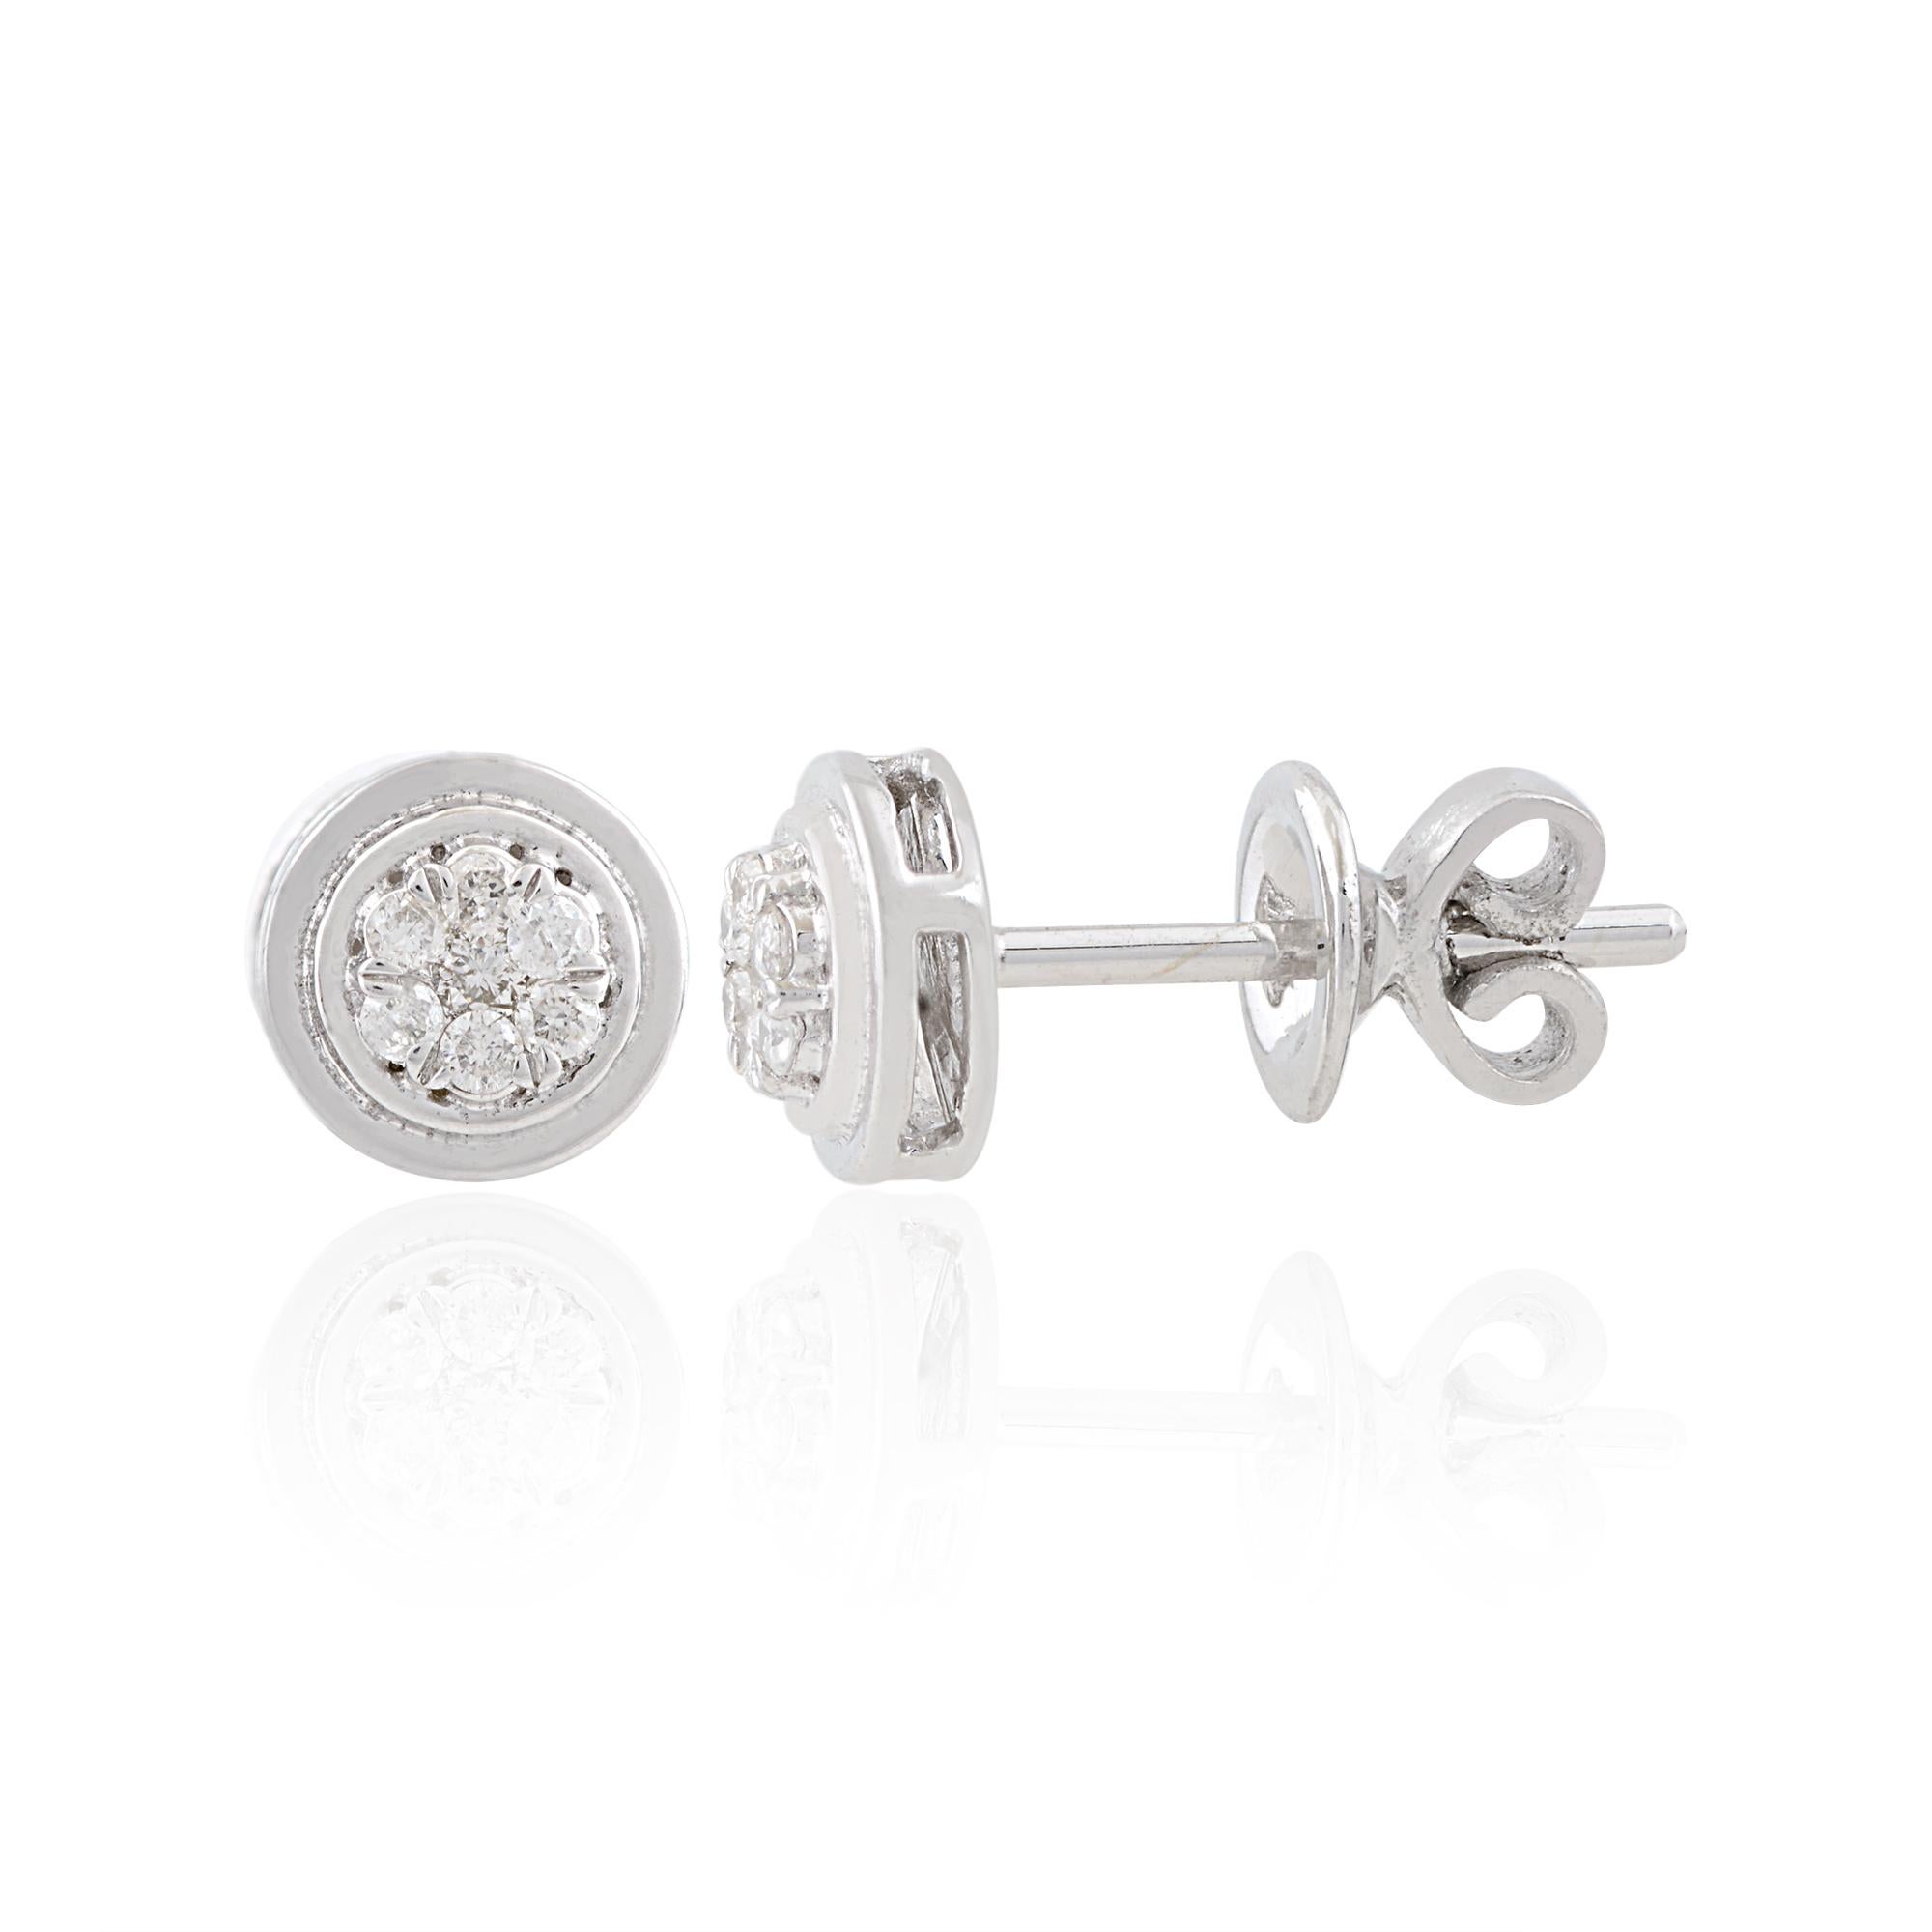 Step into the world of timeless elegance with these Natural 0.14 Carat SI/HI Diamond Stud Earrings, meticulously crafted in solid 10 Karat White Gold. These exquisite earrings are a celebration of understated sophistication and luxury, destined to